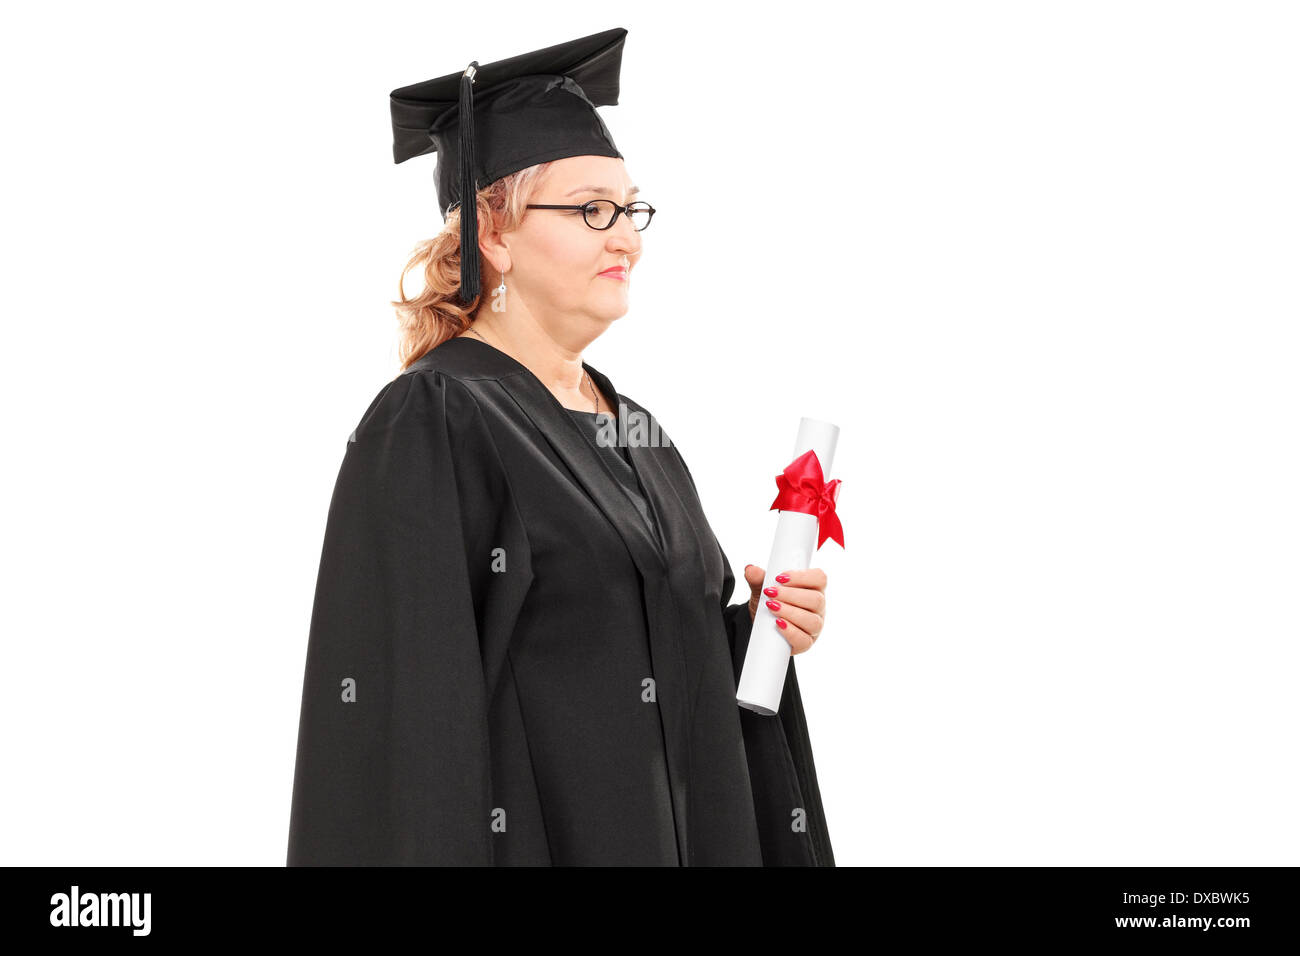 Mature female student holding a diploma Stock Photo